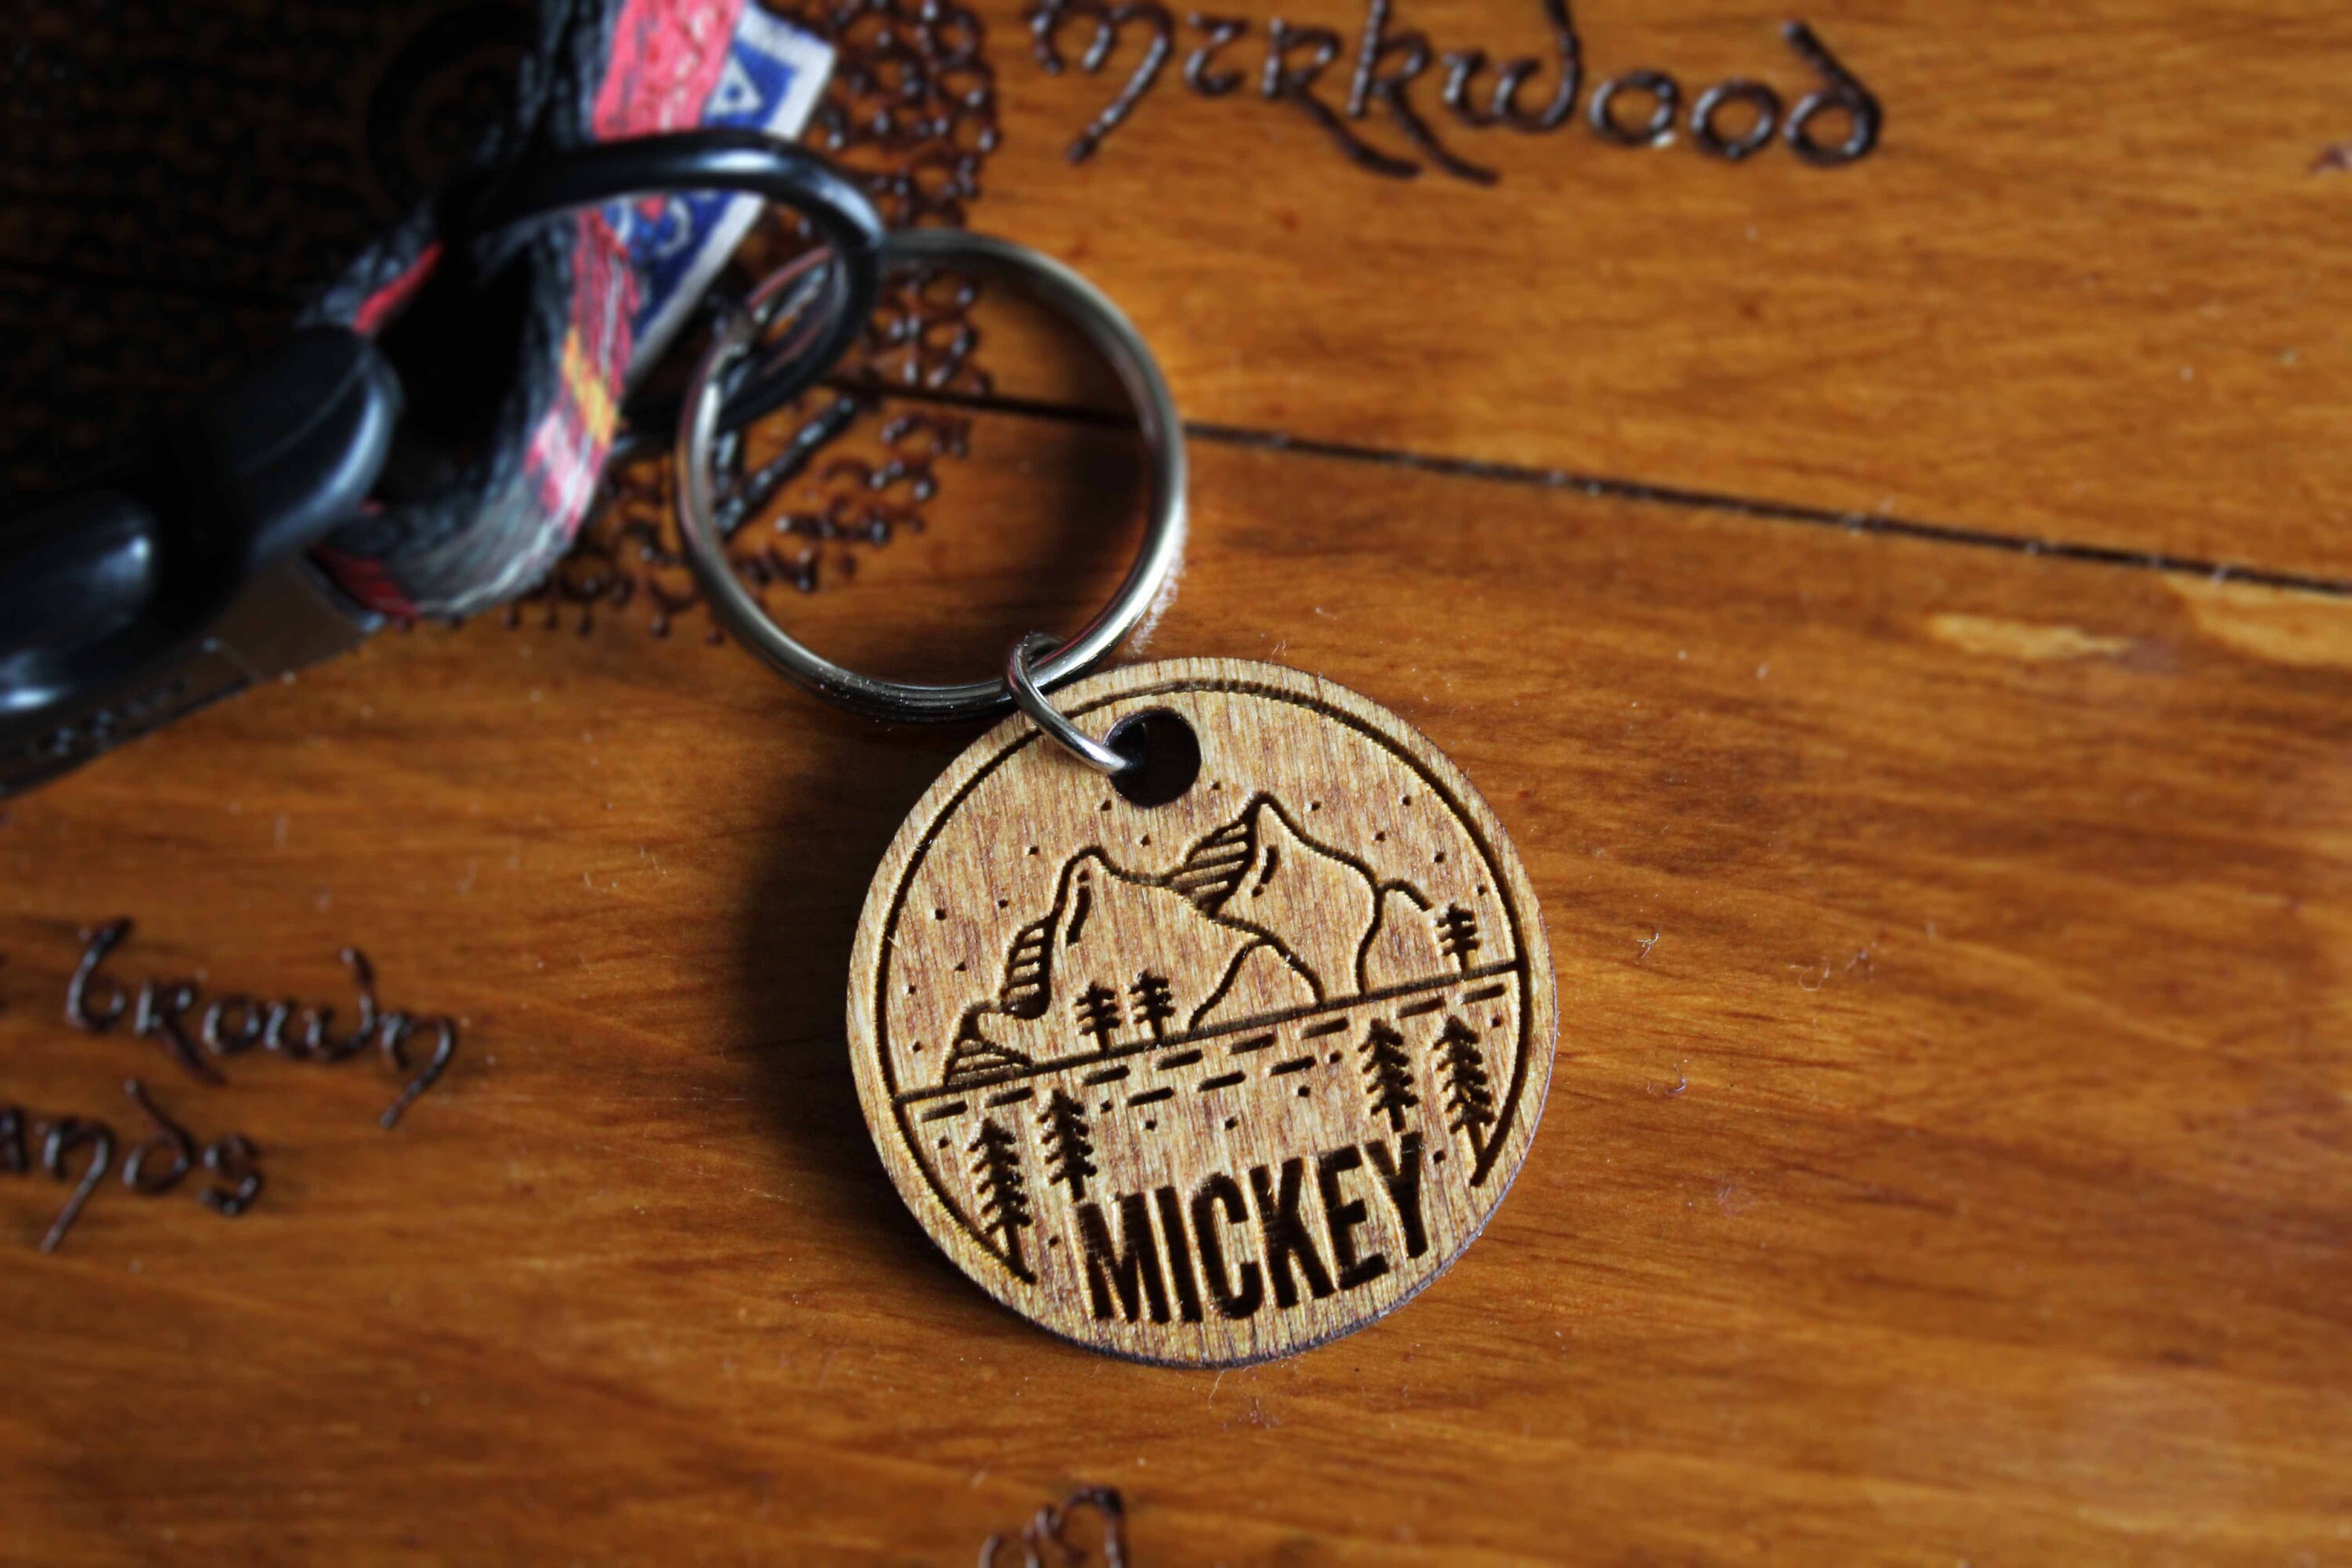 Personalised Pet Tag, Wood Pet Tags, Gift for Animal Lovers, Gifts